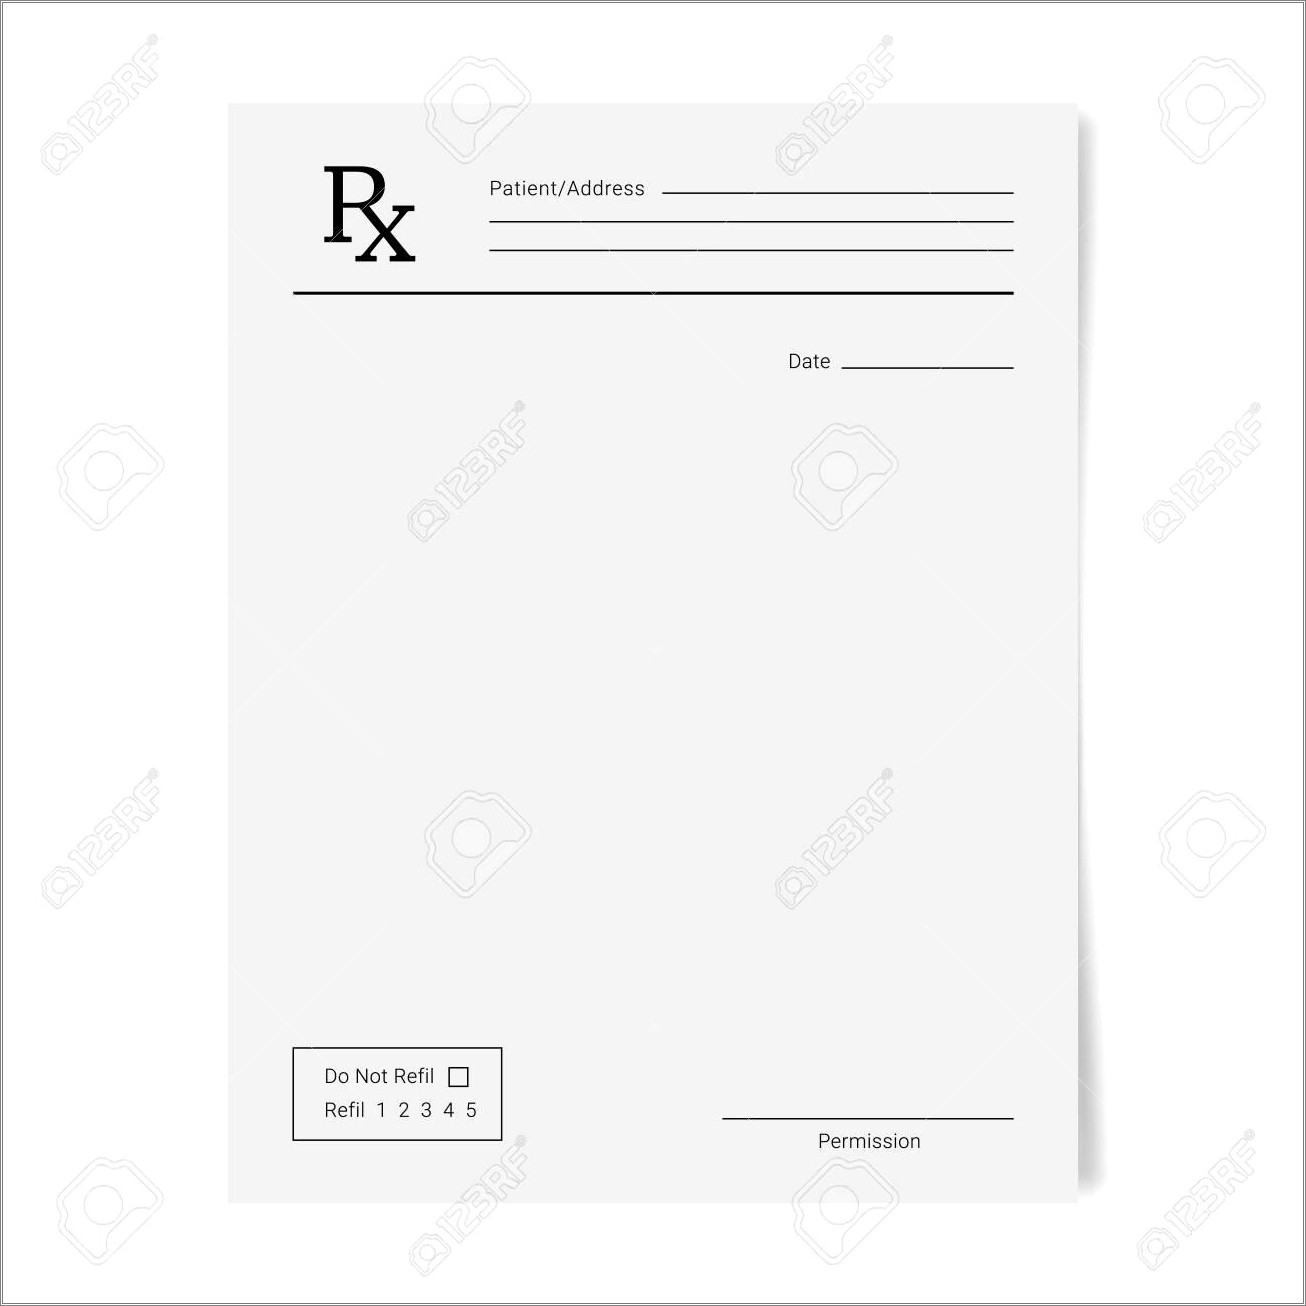 Free Prescription Blank Template Of The 1920s